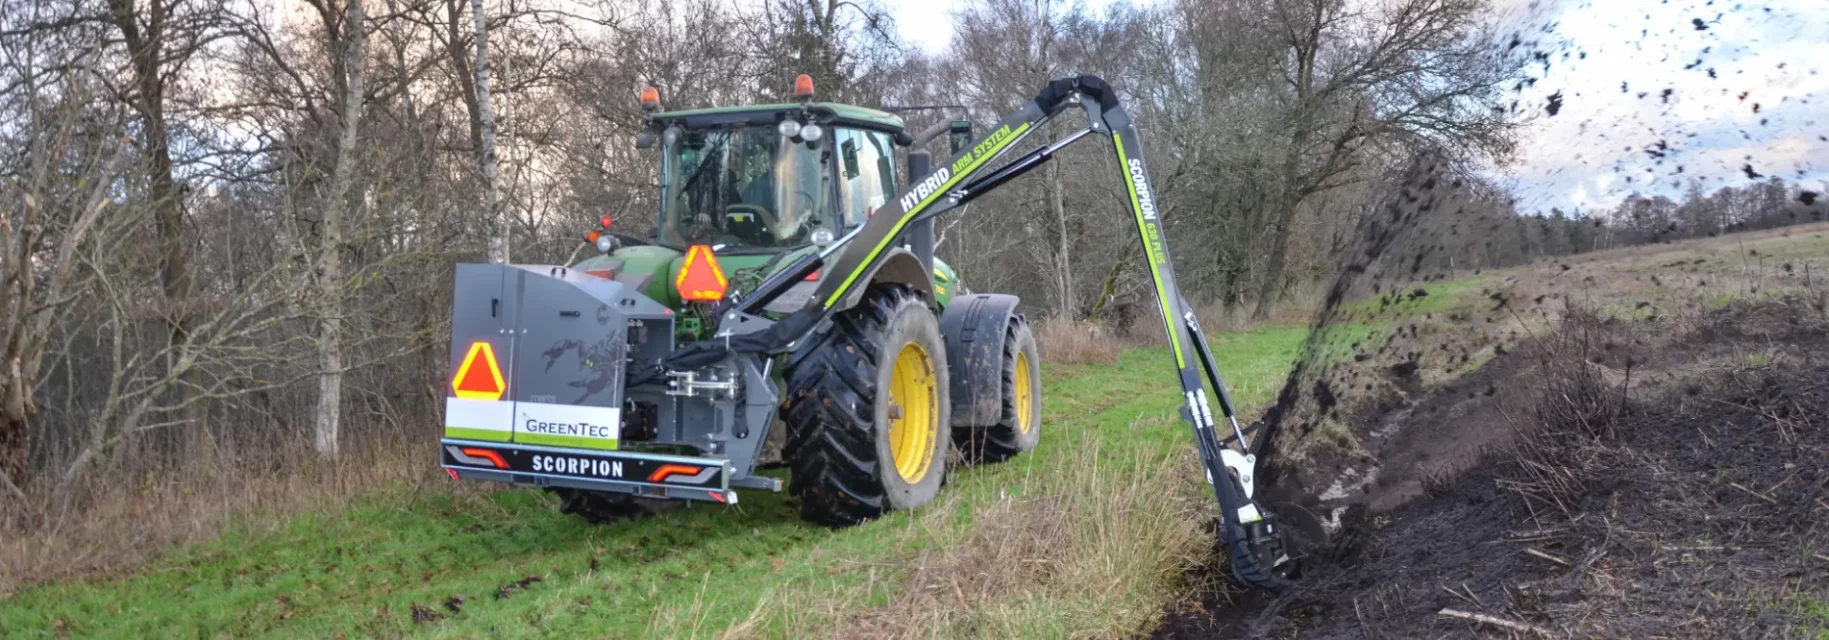 Hydraulic ditch cleaner mounted on tractor